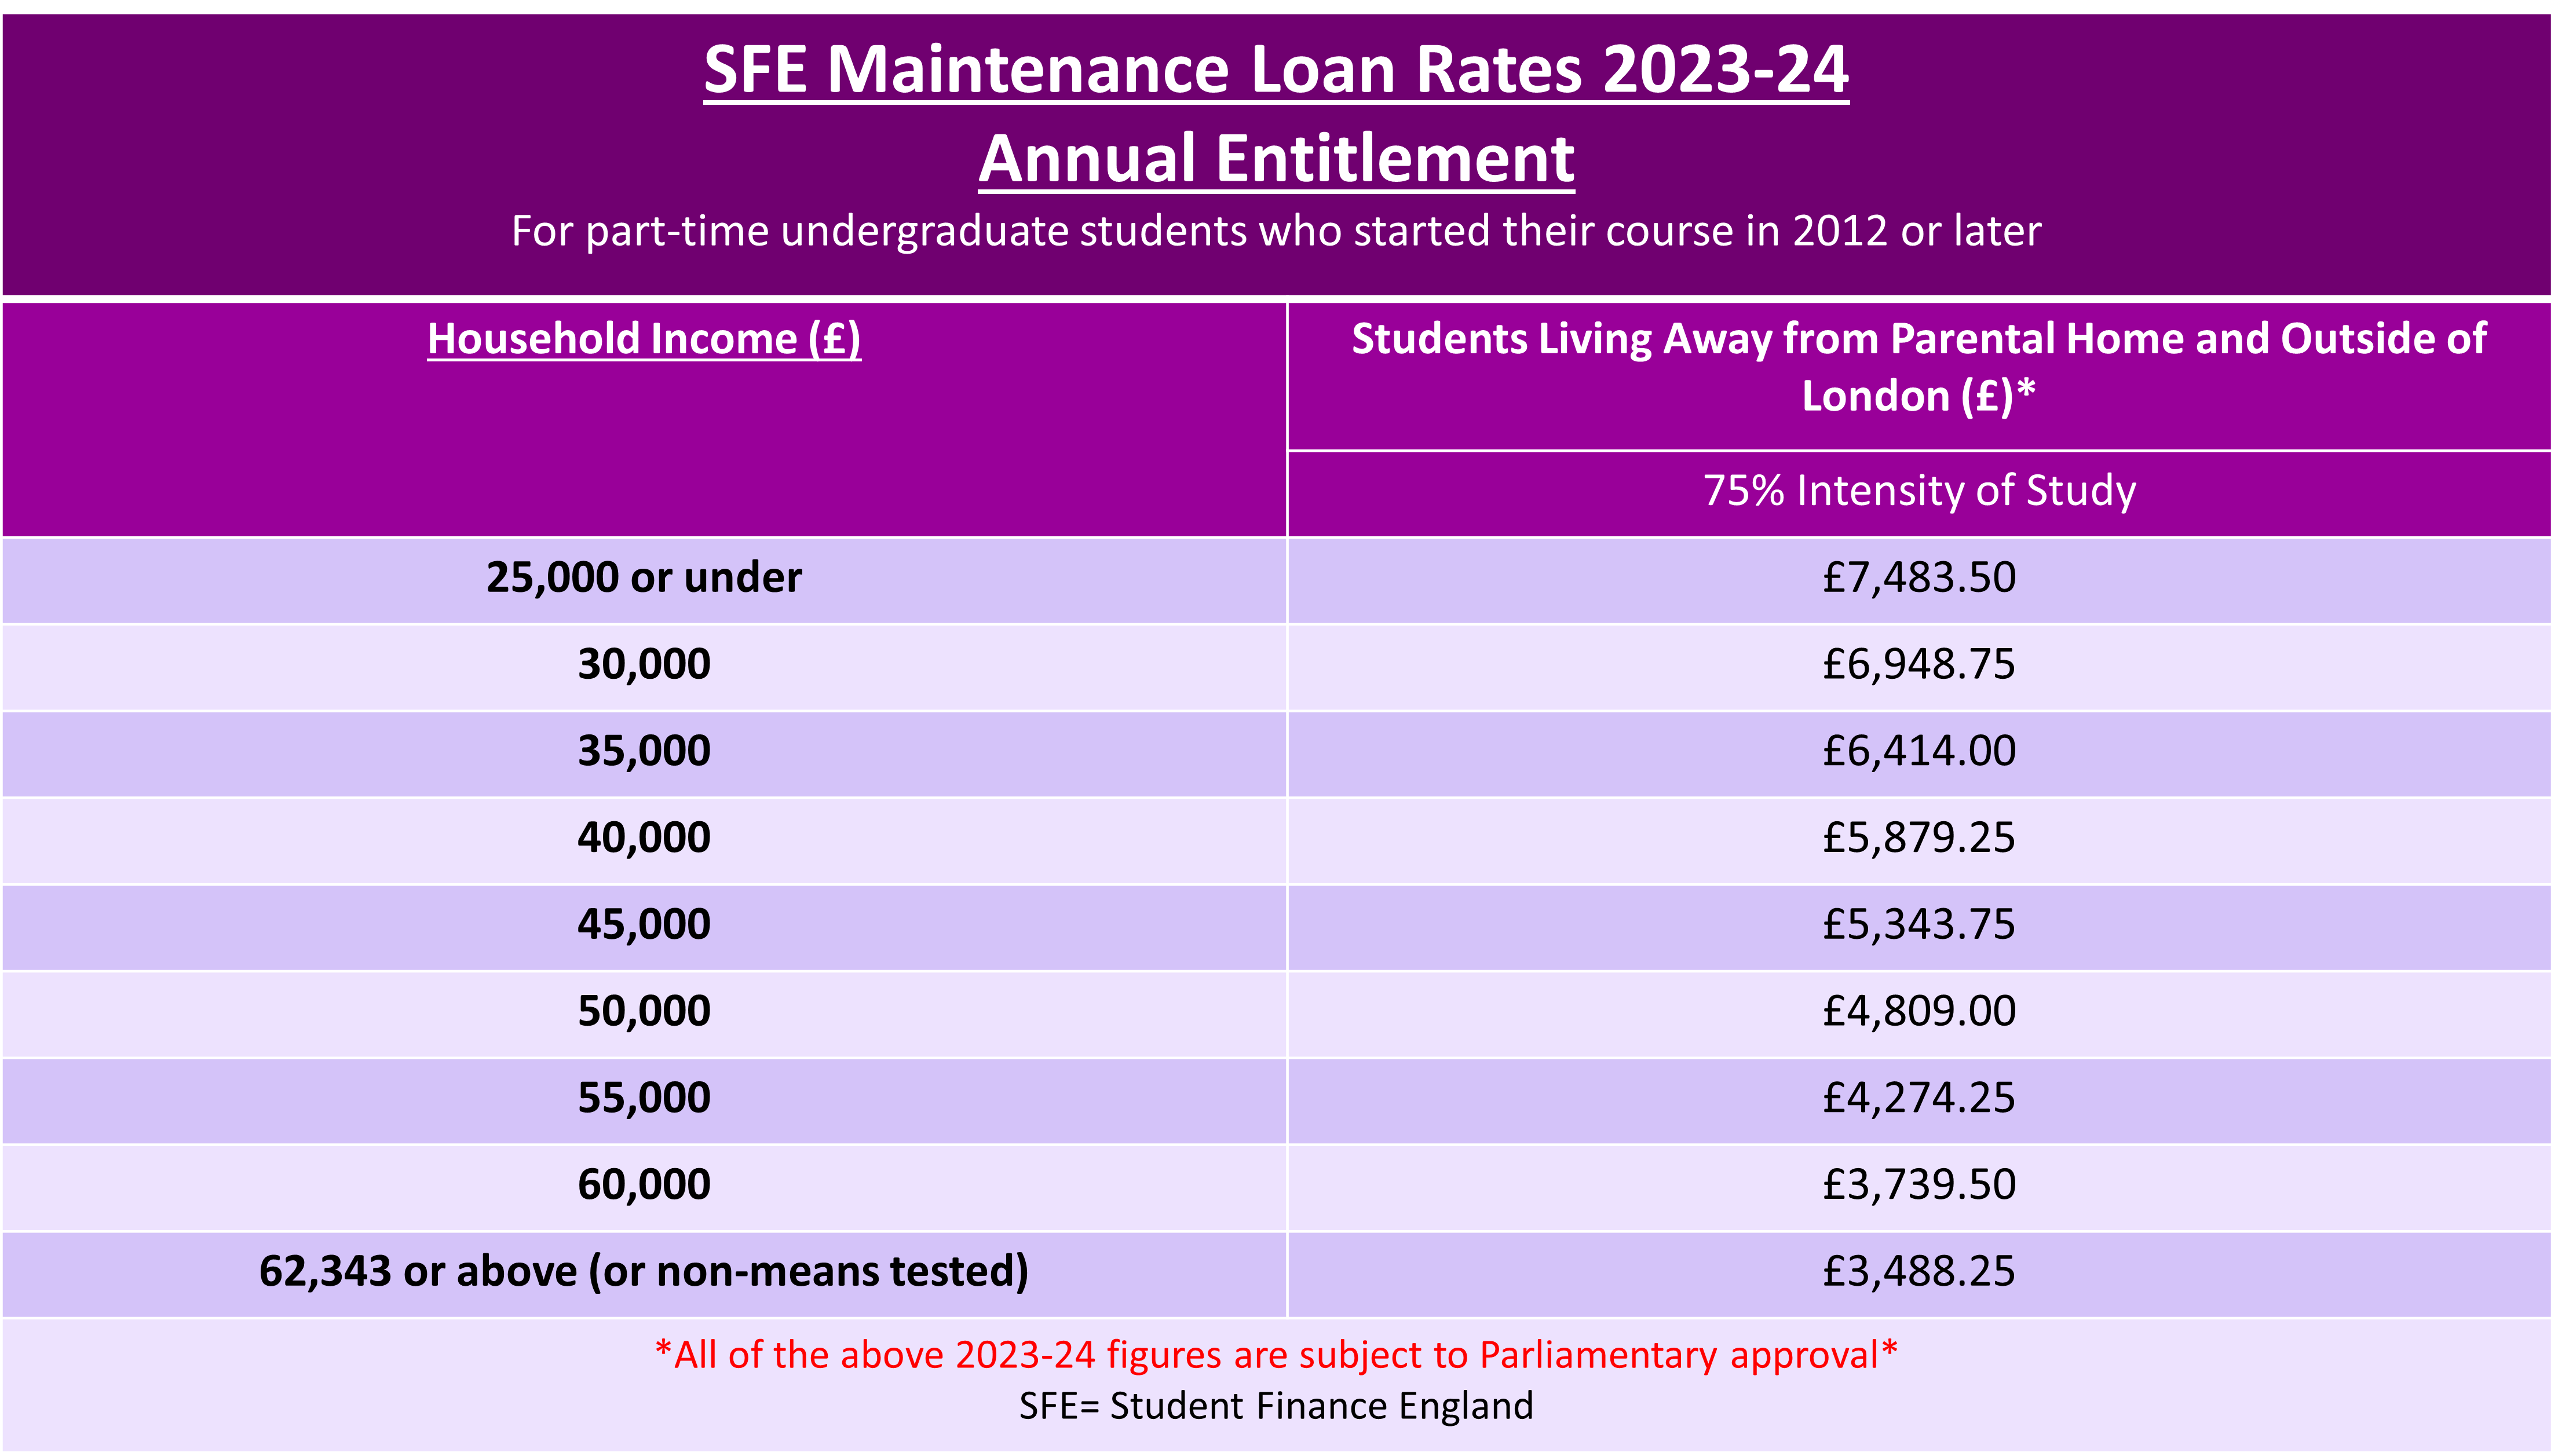 A table to show 2023-24 maintenance loan rates for part-time students studying at 75% intensity and living away from parental home but outside of London. Subject to parliamentary approval.